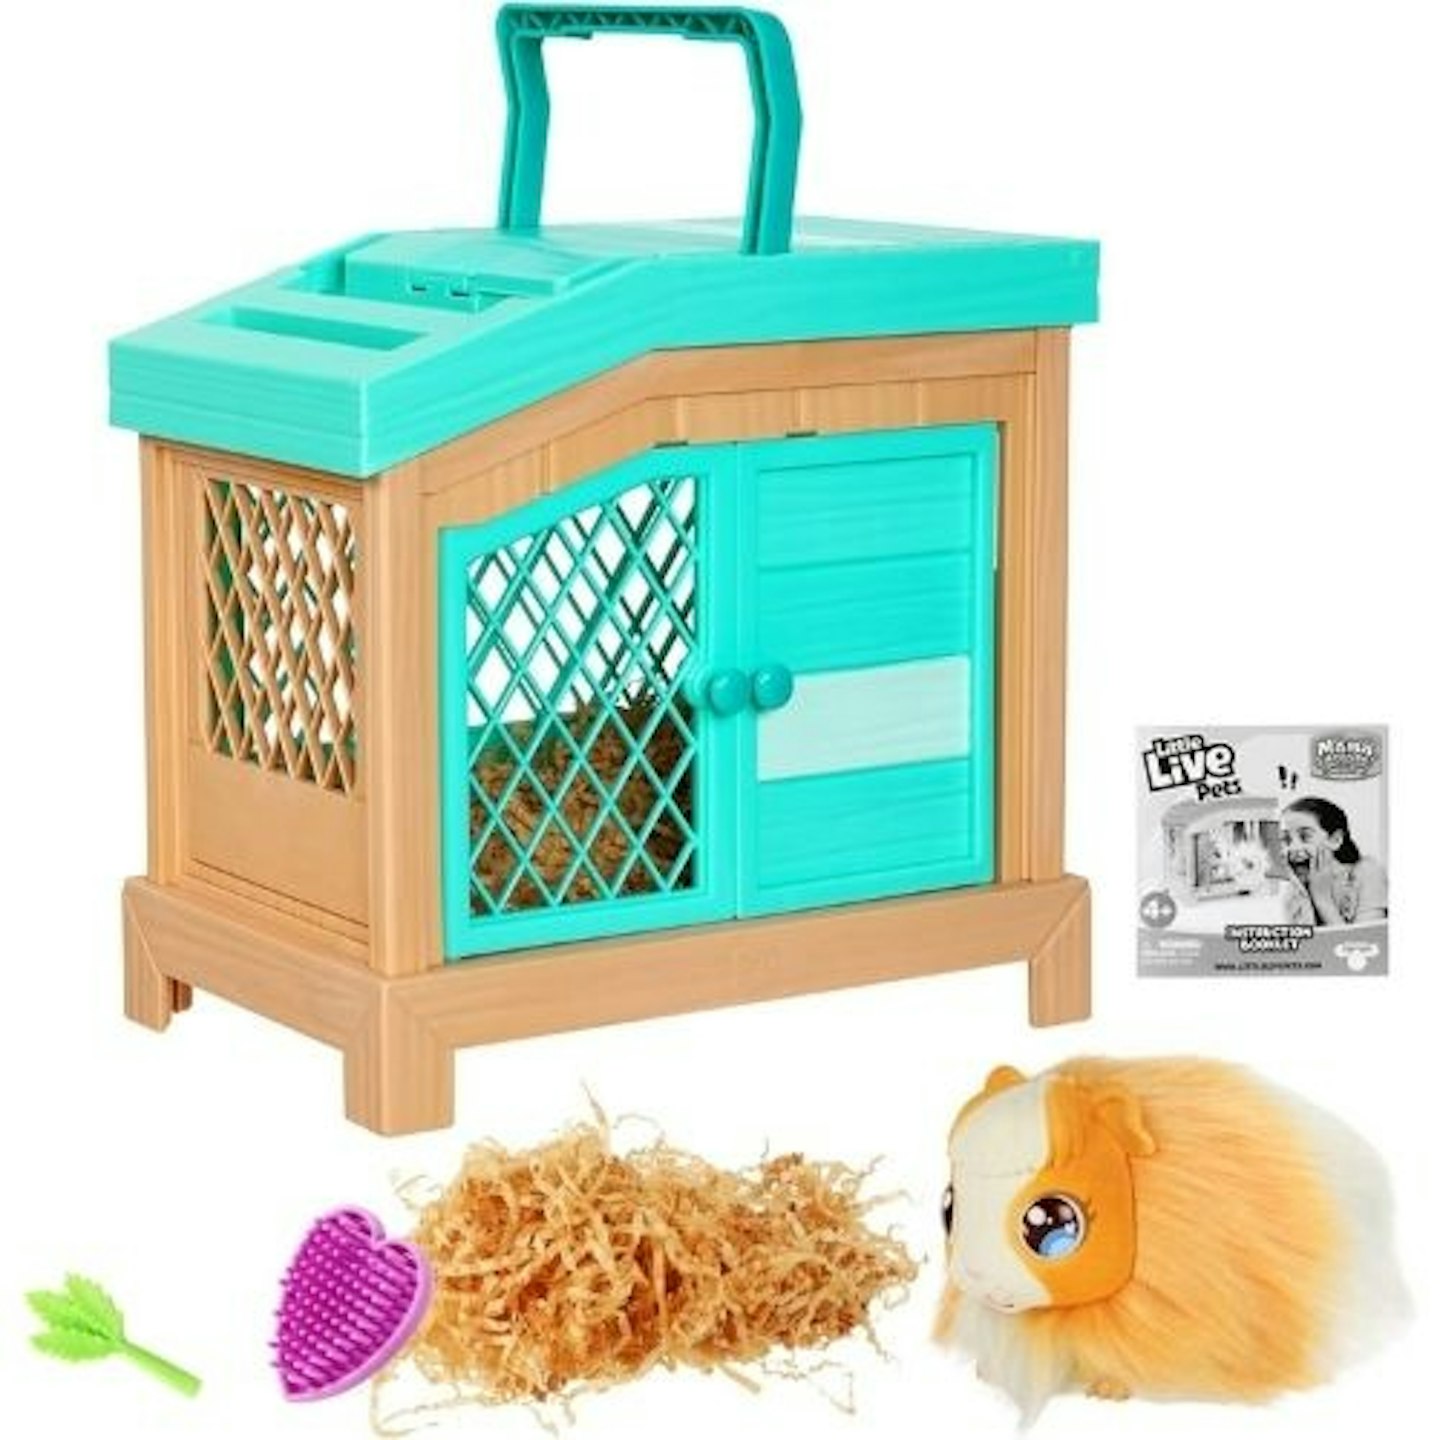 Top Christmas Toys: Interactive Mama Guinea Pig and her Hutch